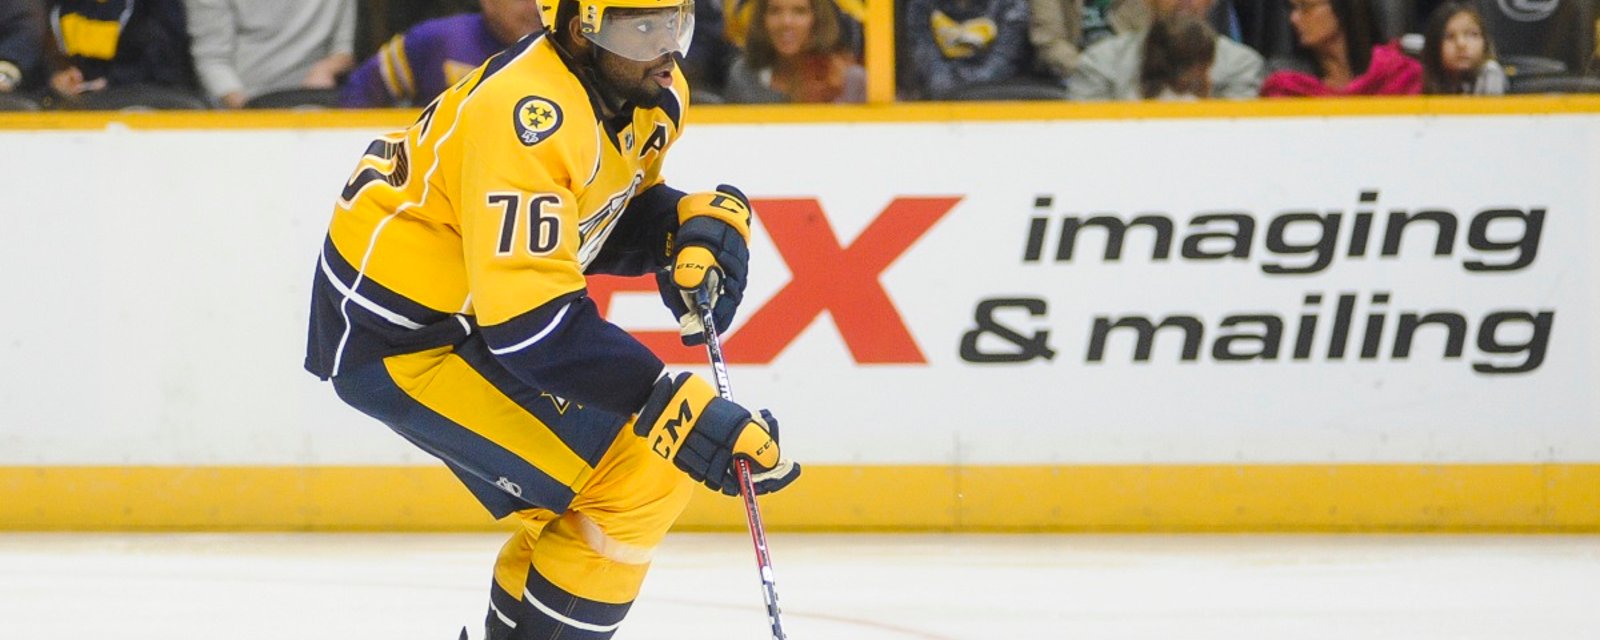 Subban scores on his first shot as a Predator and debuts a new goal celebration.